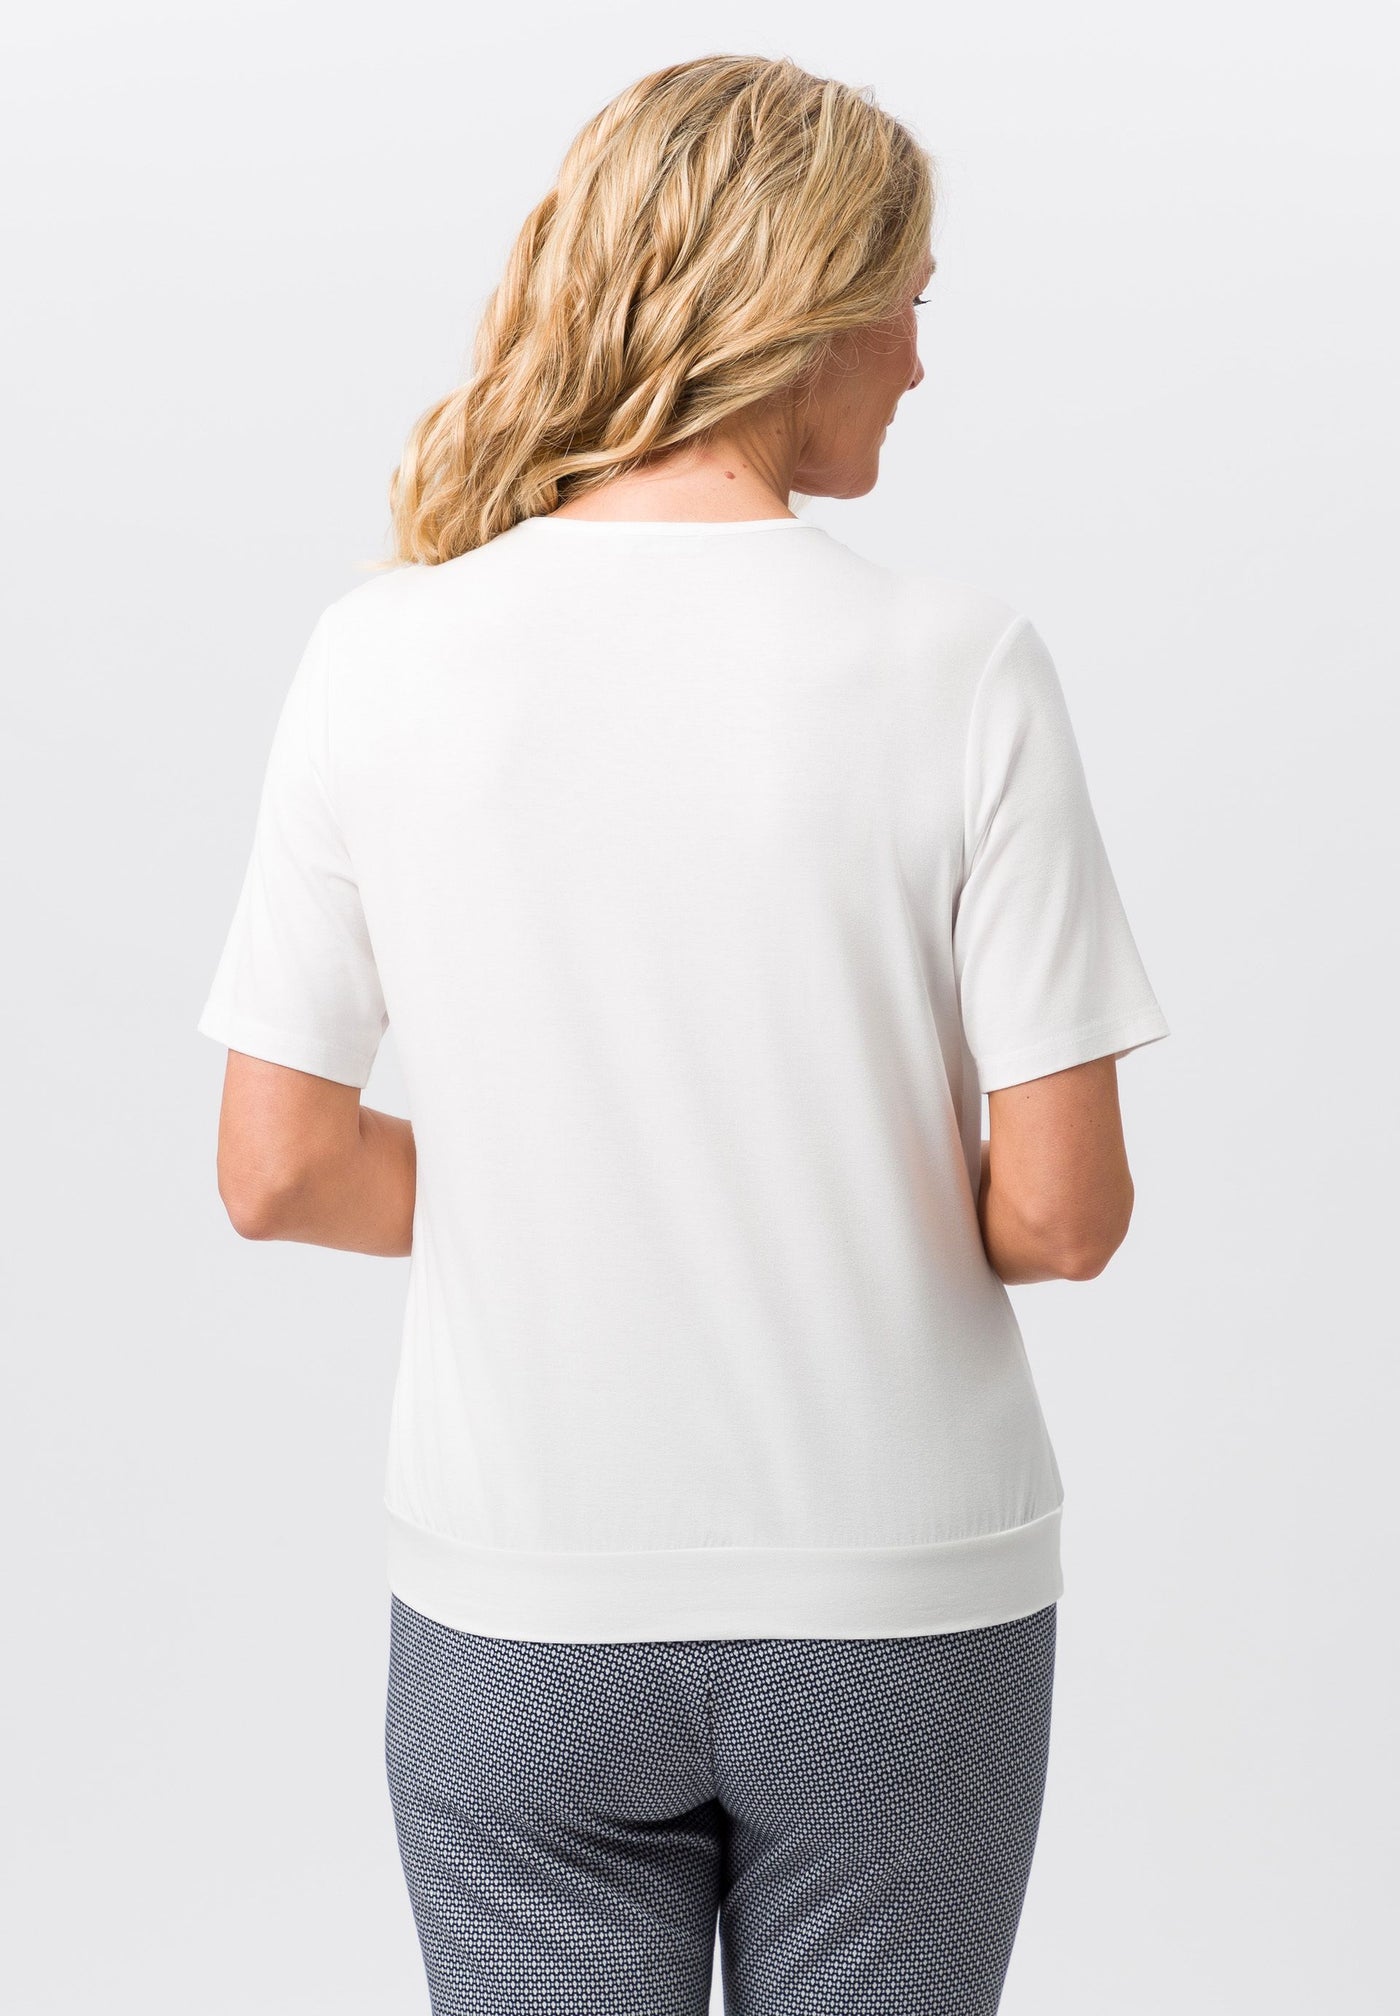 White Short Sleeved T-Shirt with Pleated Front